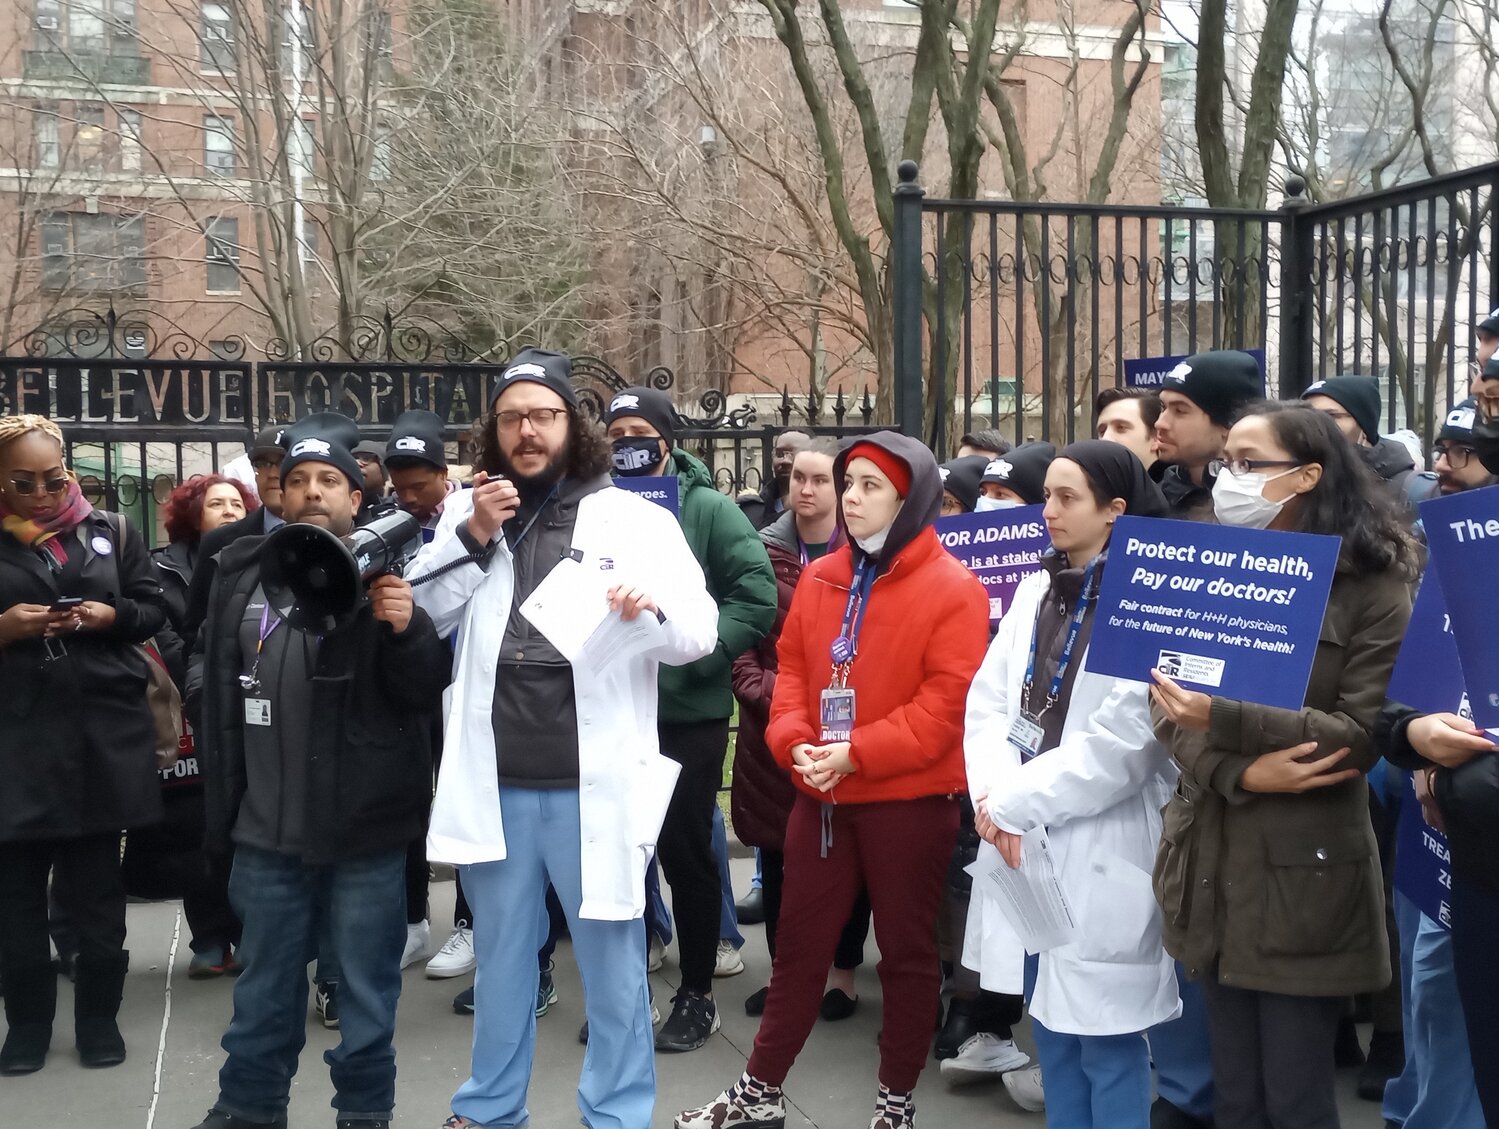 NYC H+H residents, whose contract expired in December 2021, are seeking raises so that their pay will no longer lag behind physicians at safety-net hospitals in the private-sector. Under NYC H+H's current proposal, public-sector residents would earn about $5,500 less than other physicians.